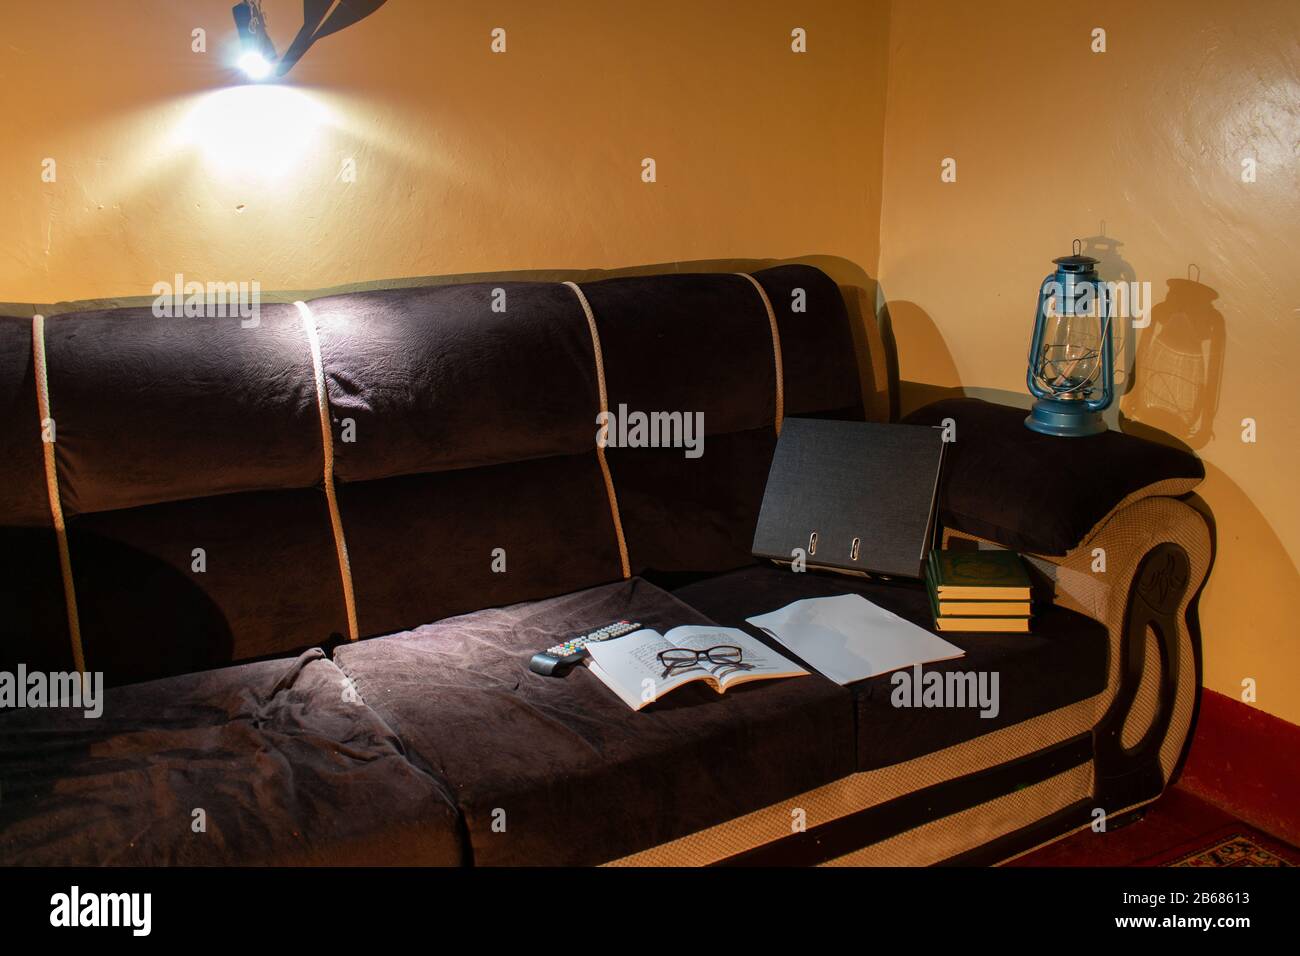 files and books on a couch under a hanging torchlight after a power black out Stock Photo